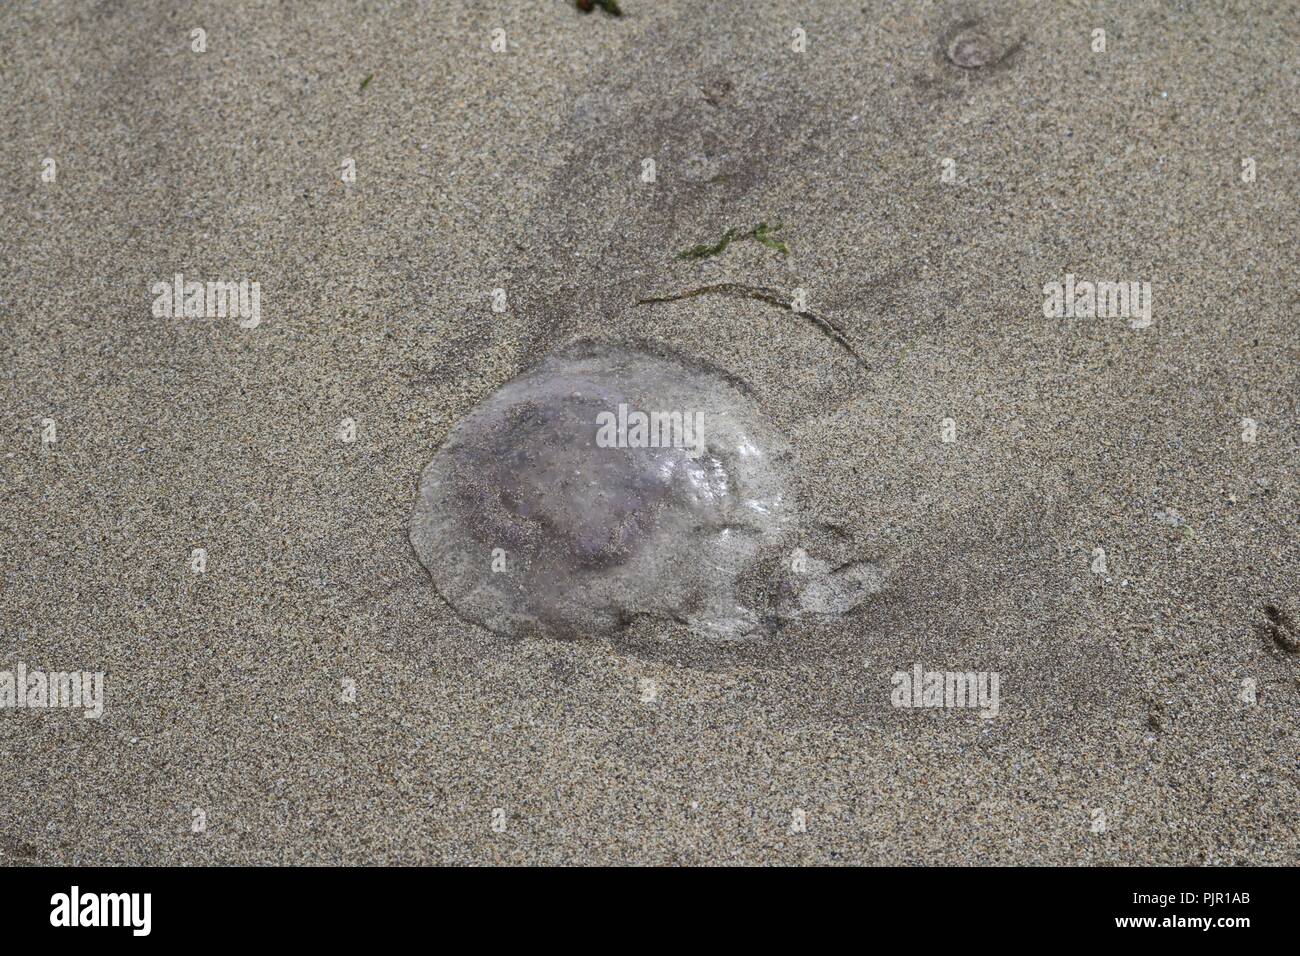 Moon jellyfish washed up on beach Stock Photo